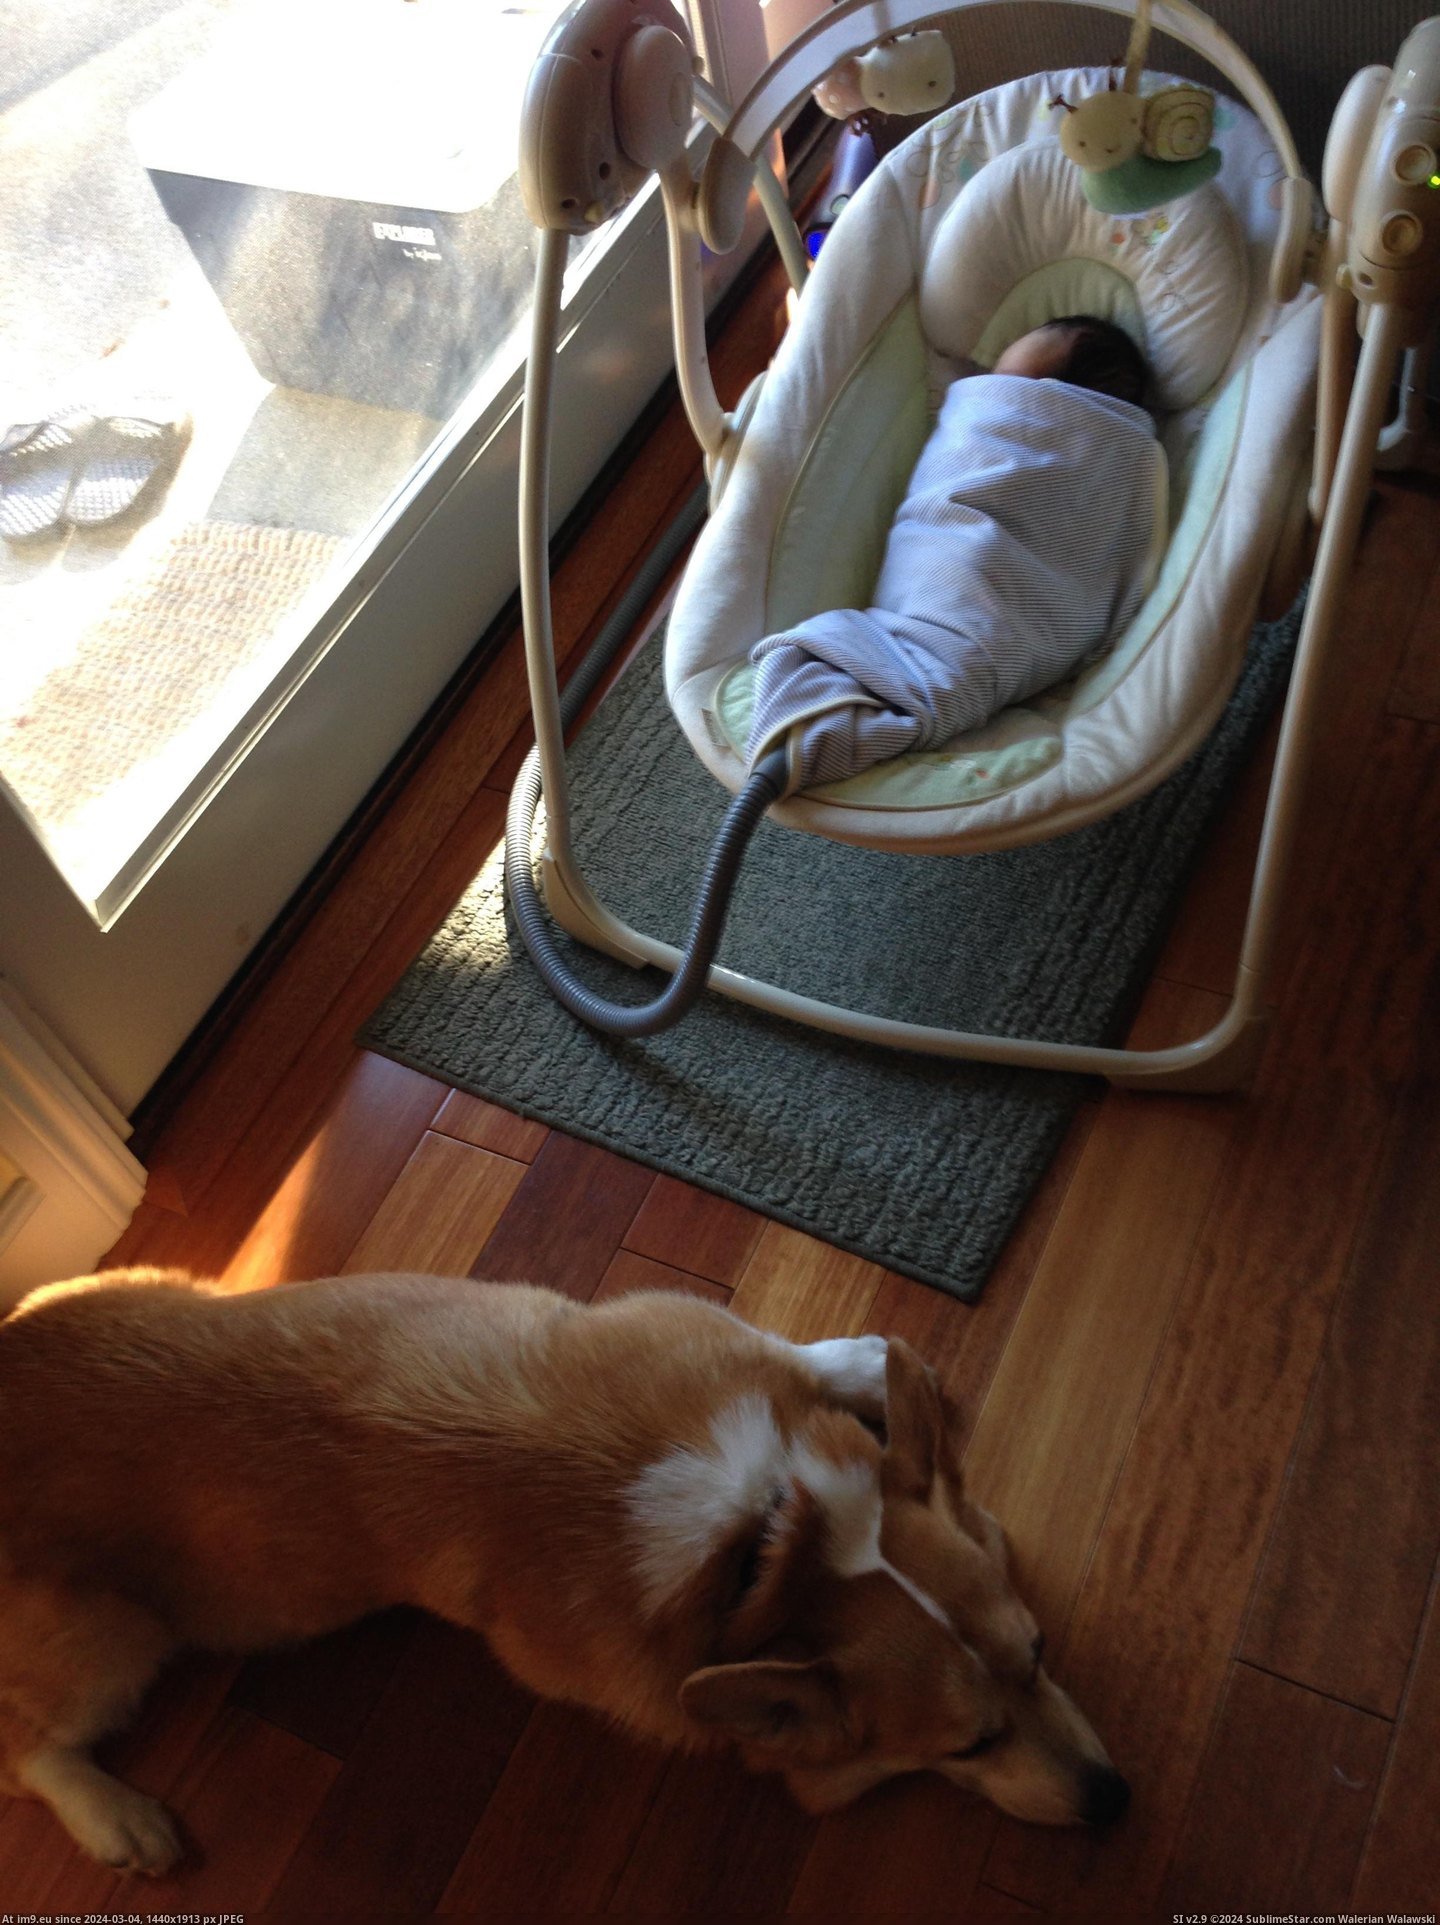 #Was #New #Ago #But #How #Daughter #Weeks #Born [Aww] My daughter was born three weeks ago. I worried about how my corgi would react but he's treating her like his new BFF... 4 Pic. (Image of album My r/AWW favs))